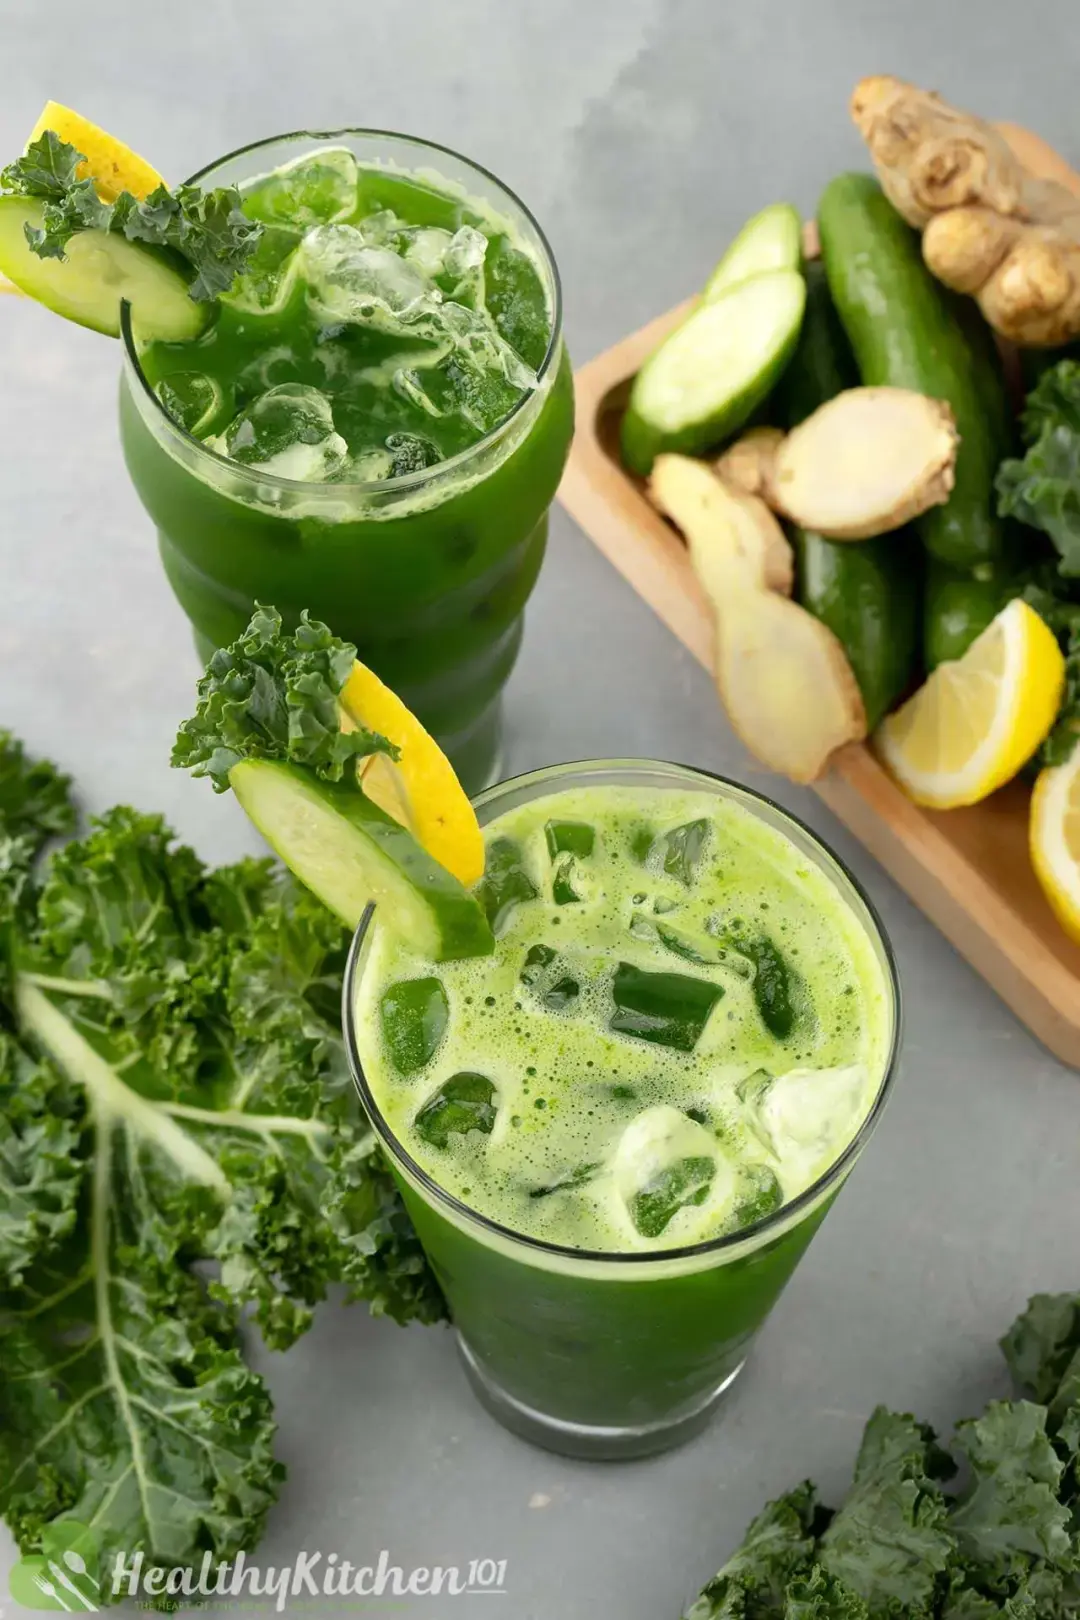 Two iced glasses of green kale juice next to some kale and a tray of cucumber, ginger, and lemon